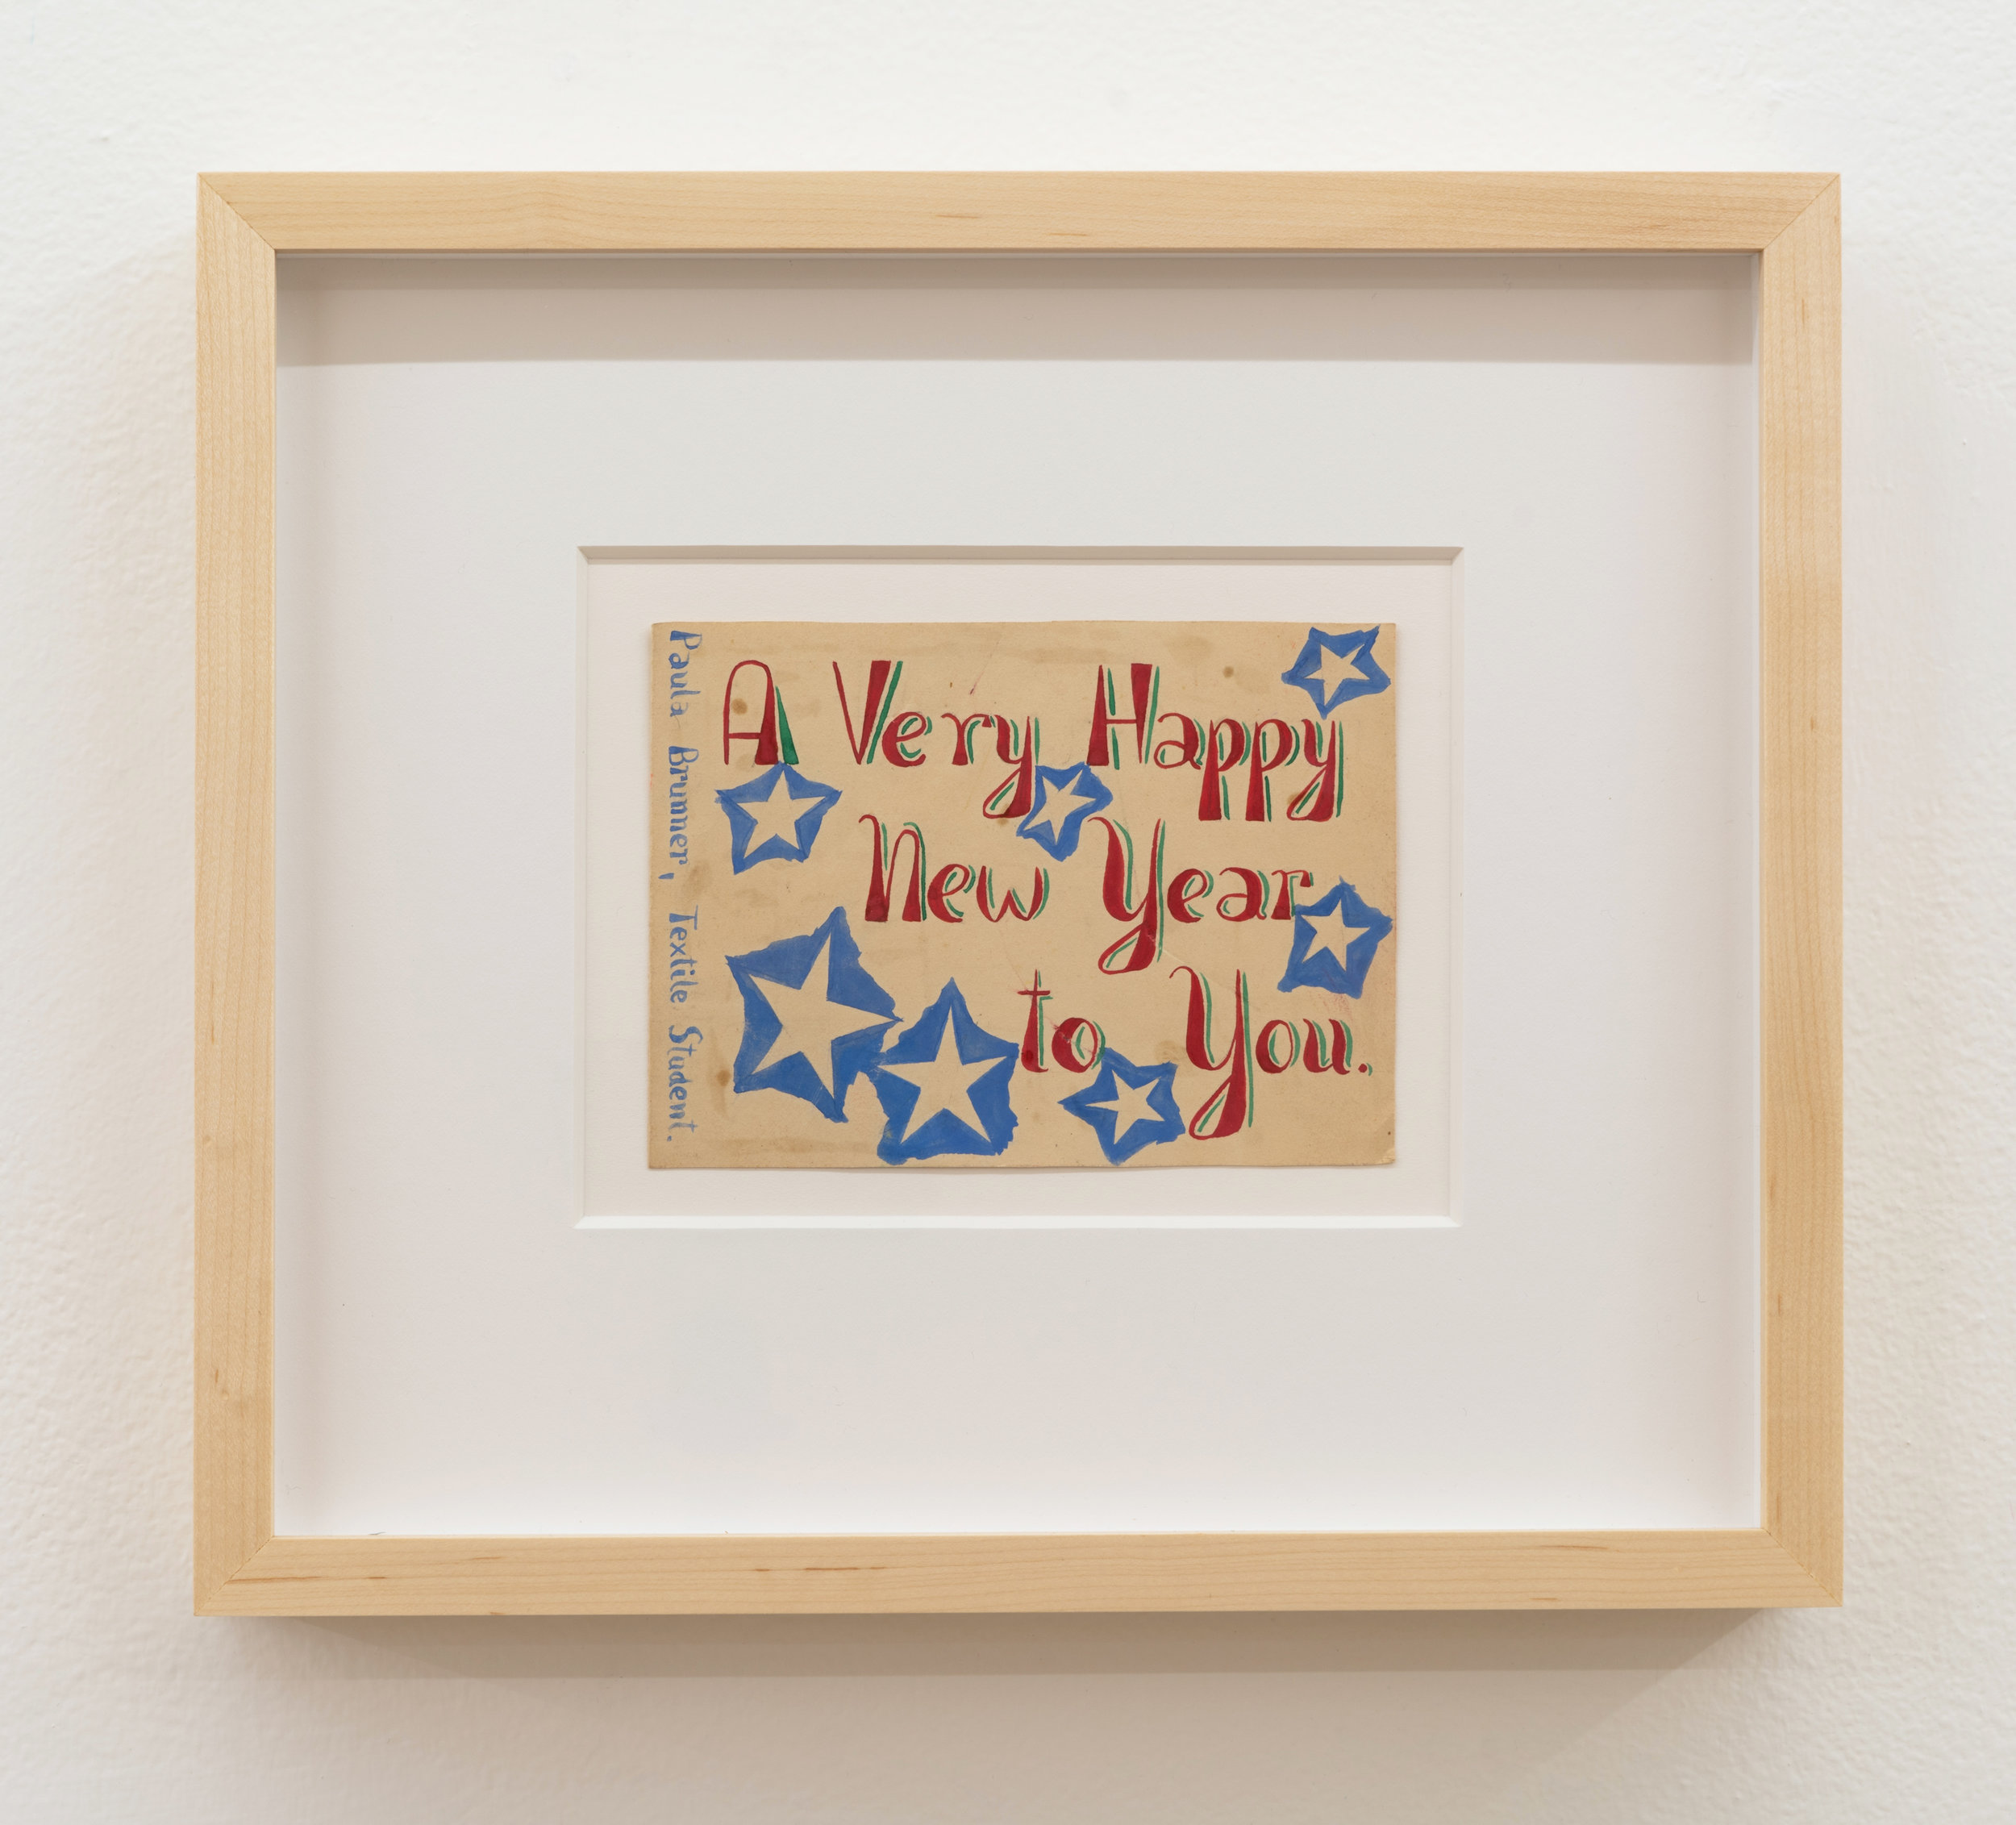  Paula Brunner Abelow,  A Very Happy New Year to You,  circa 1940s, Acrylic on paper, 4 x 6 inches 